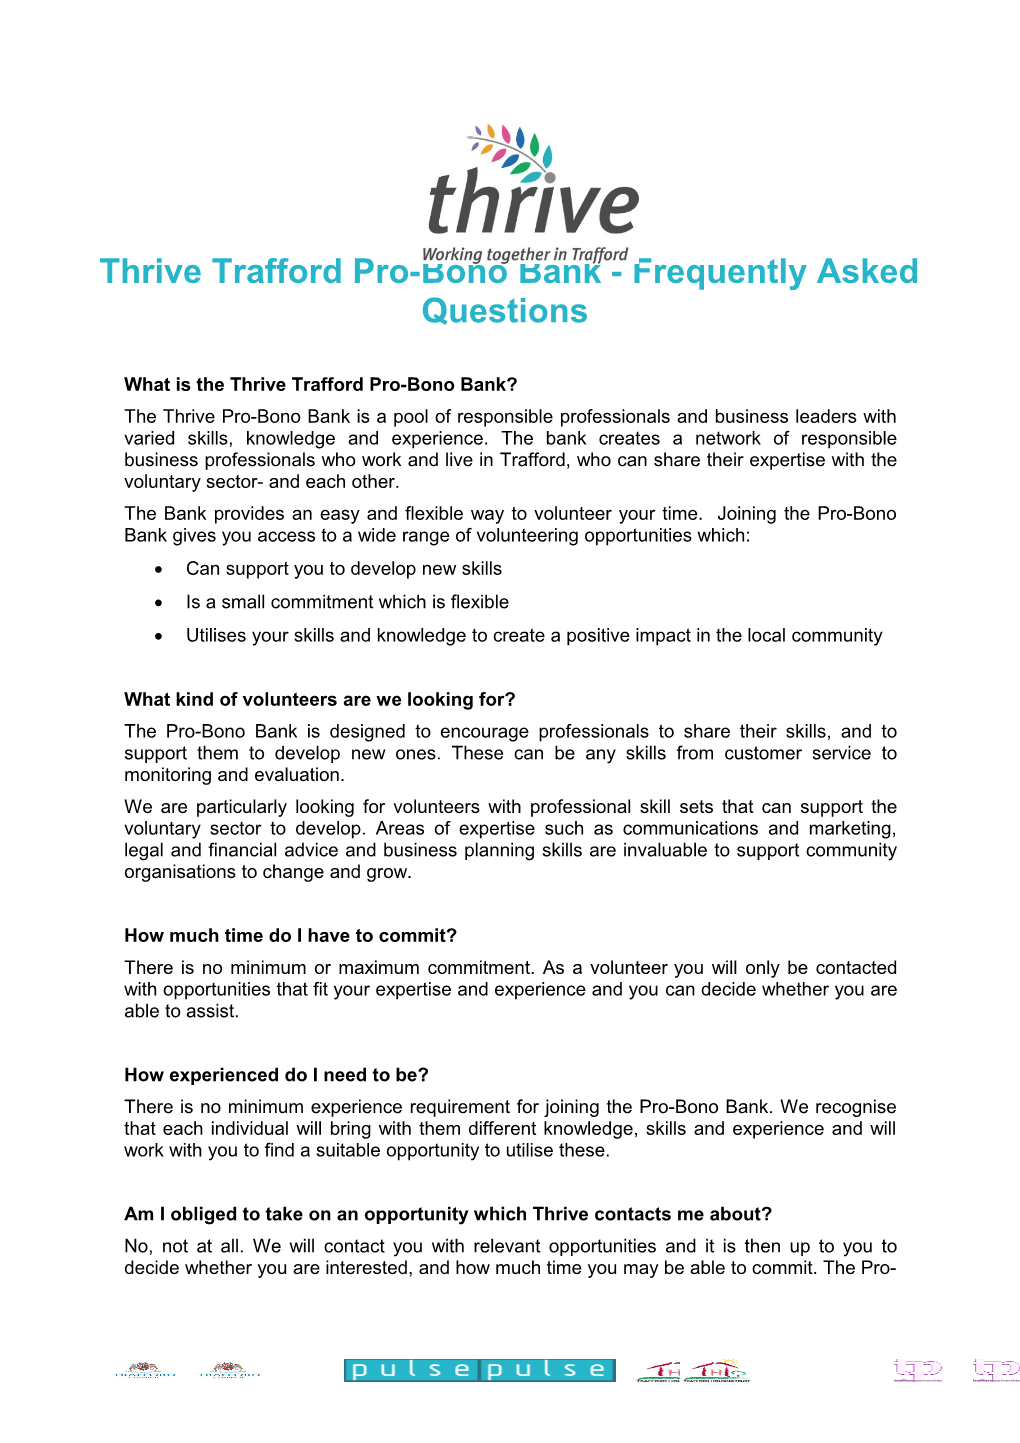 Thrive Trafford Pro-Bono Bank - Frequently Asked Questions